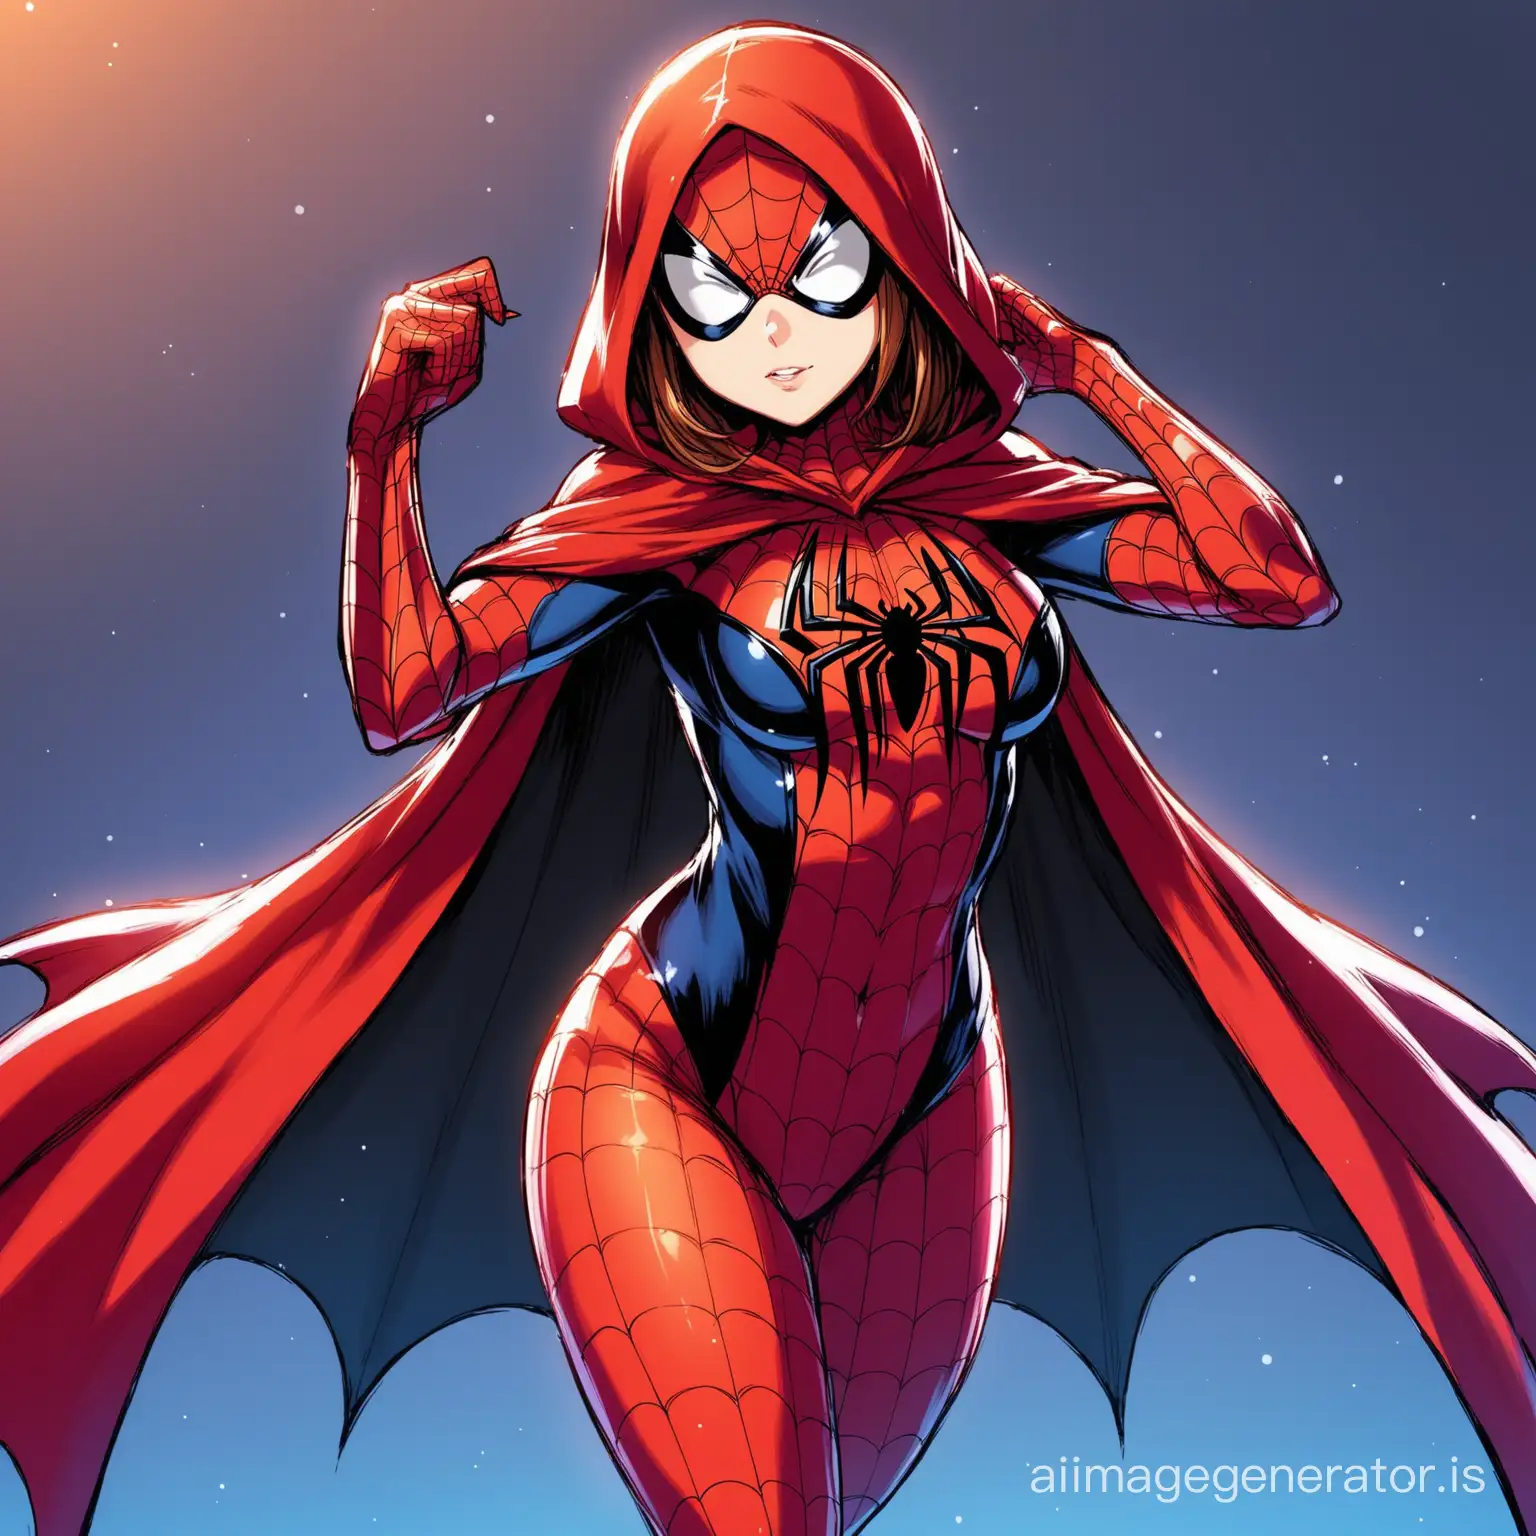 hot anime girl in spidergirl costume wearing a cape